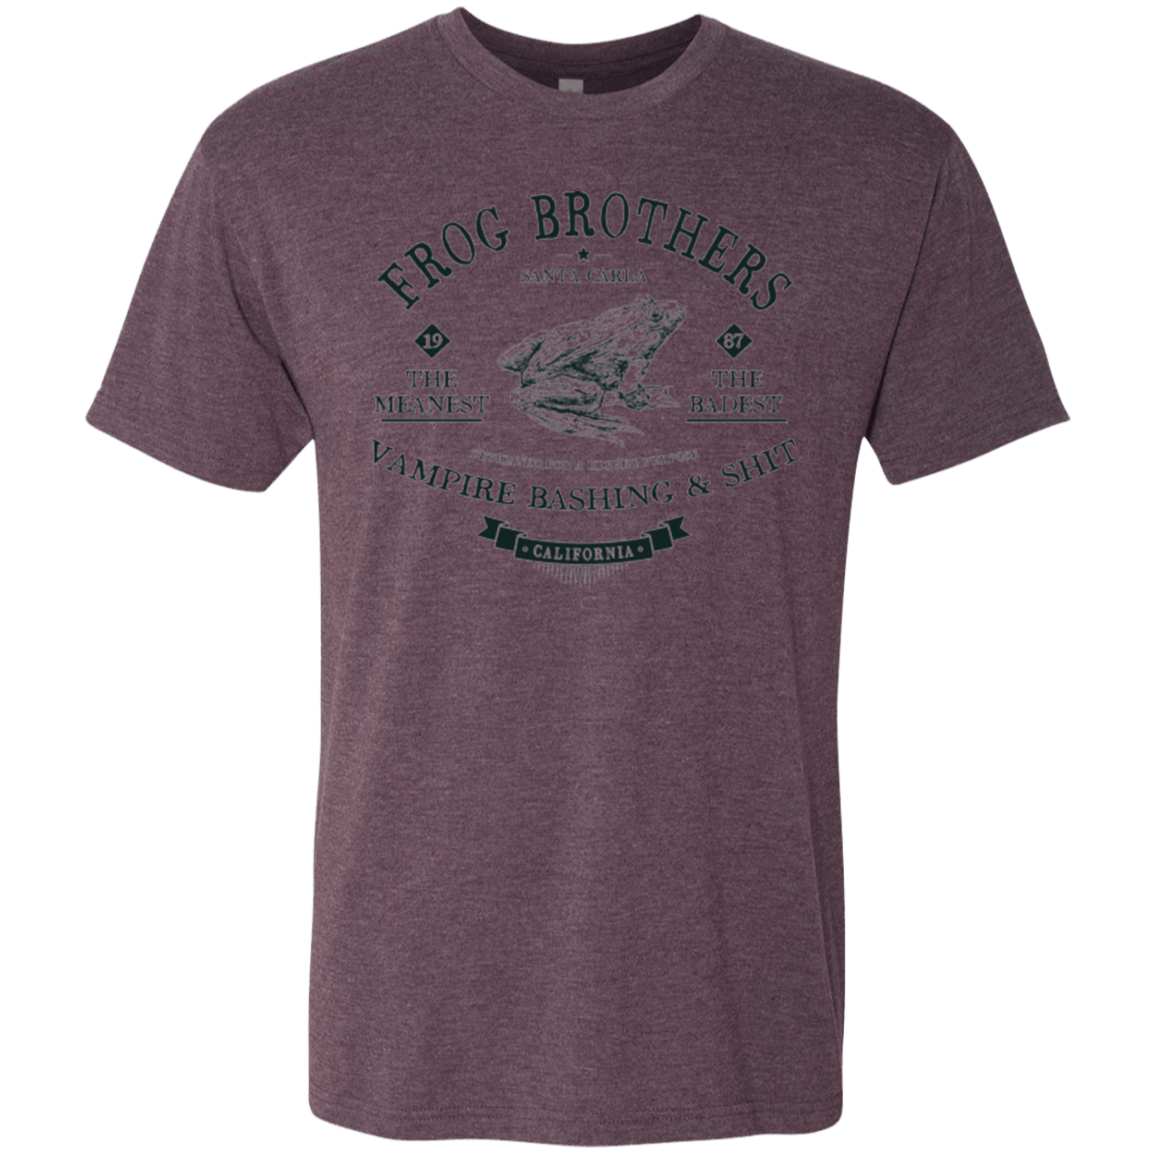 T-Shirts Vintage Purple / Small Frog Brothers Men's Triblend T-Shirt